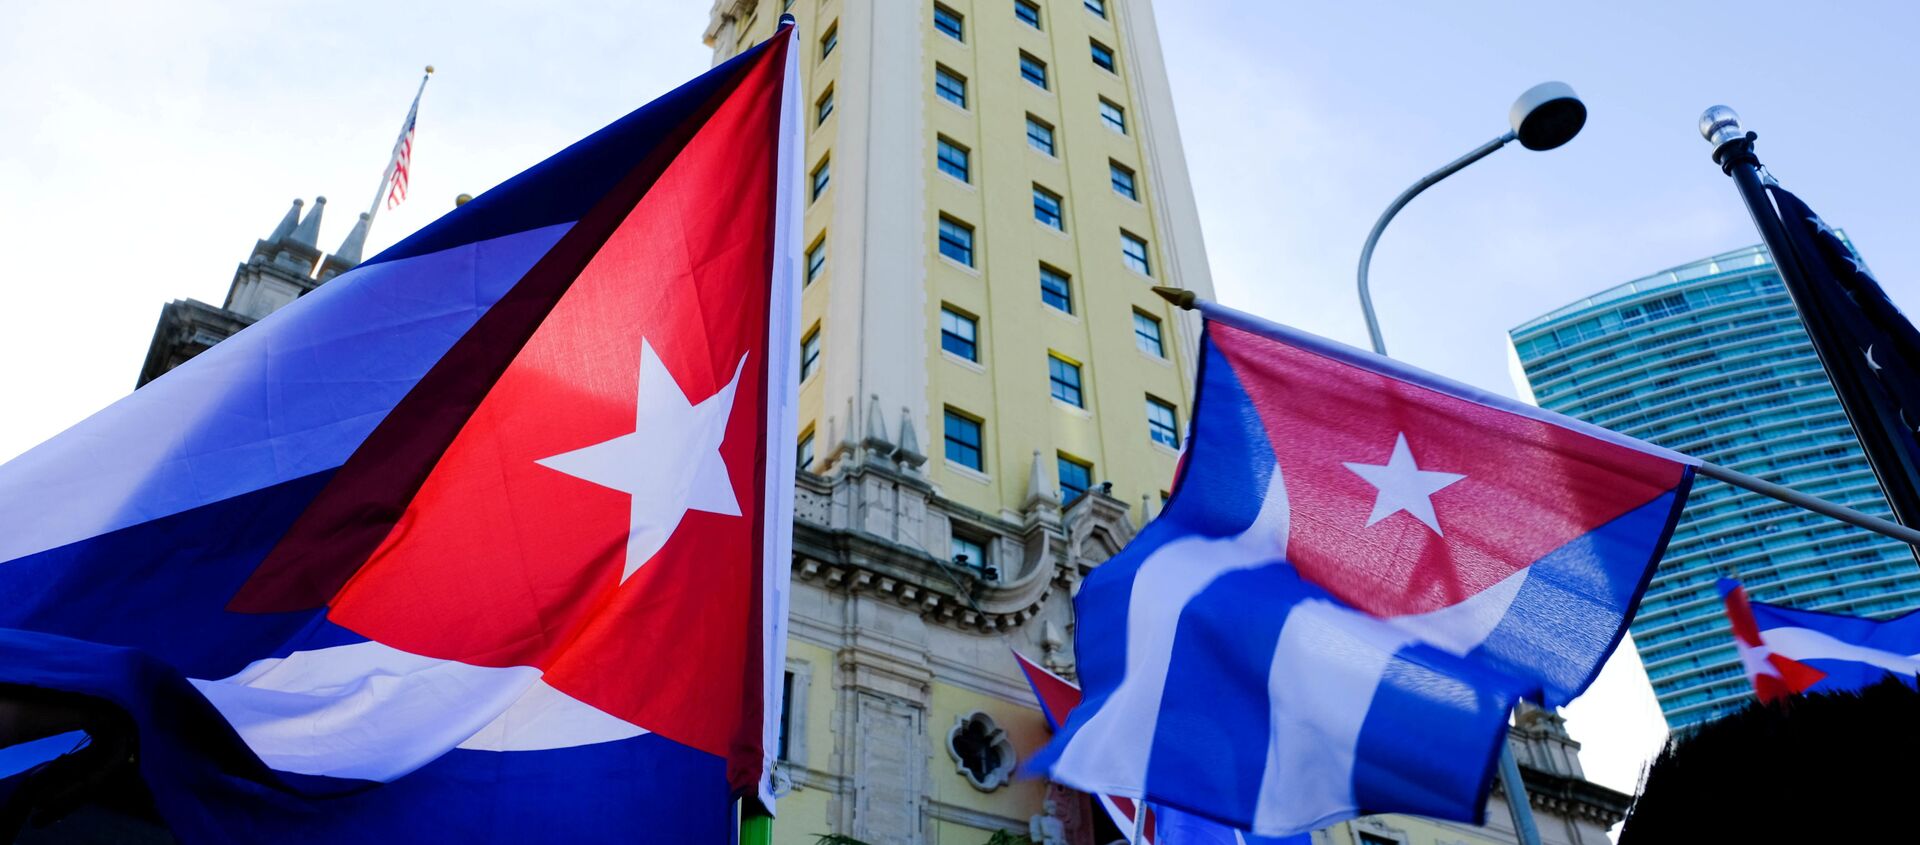 Emigres wave Cuban flags at the Freedom Tower in reaction to reports of protests in Cuba against its deteriorating economy, in Miami, Florida, U.S. July 17, 2021 - Sputnik International, 1920, 21.07.2021